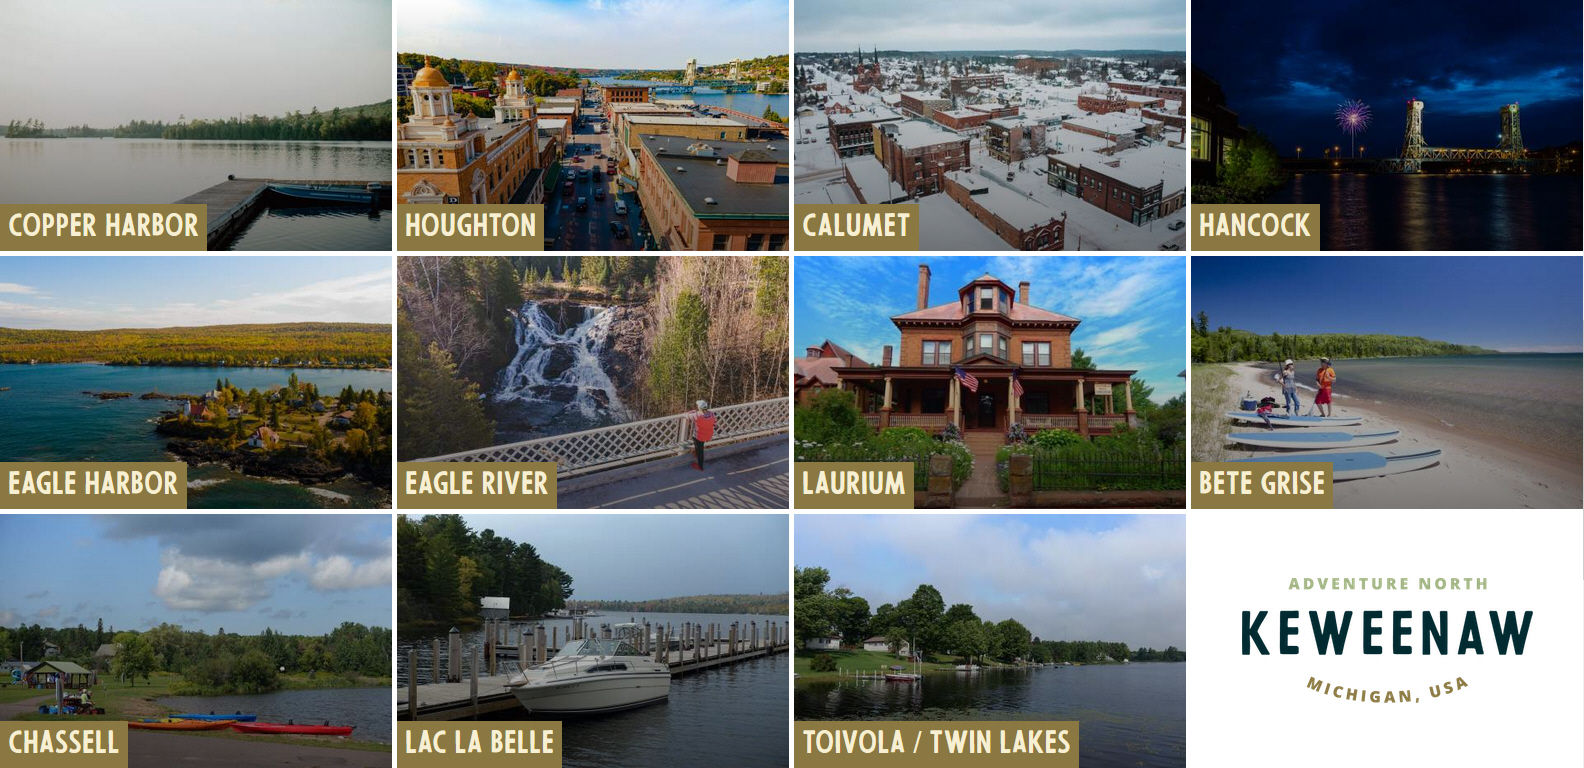 Visit Keweenaw Launches New Destination Brand & Website with Simpleview